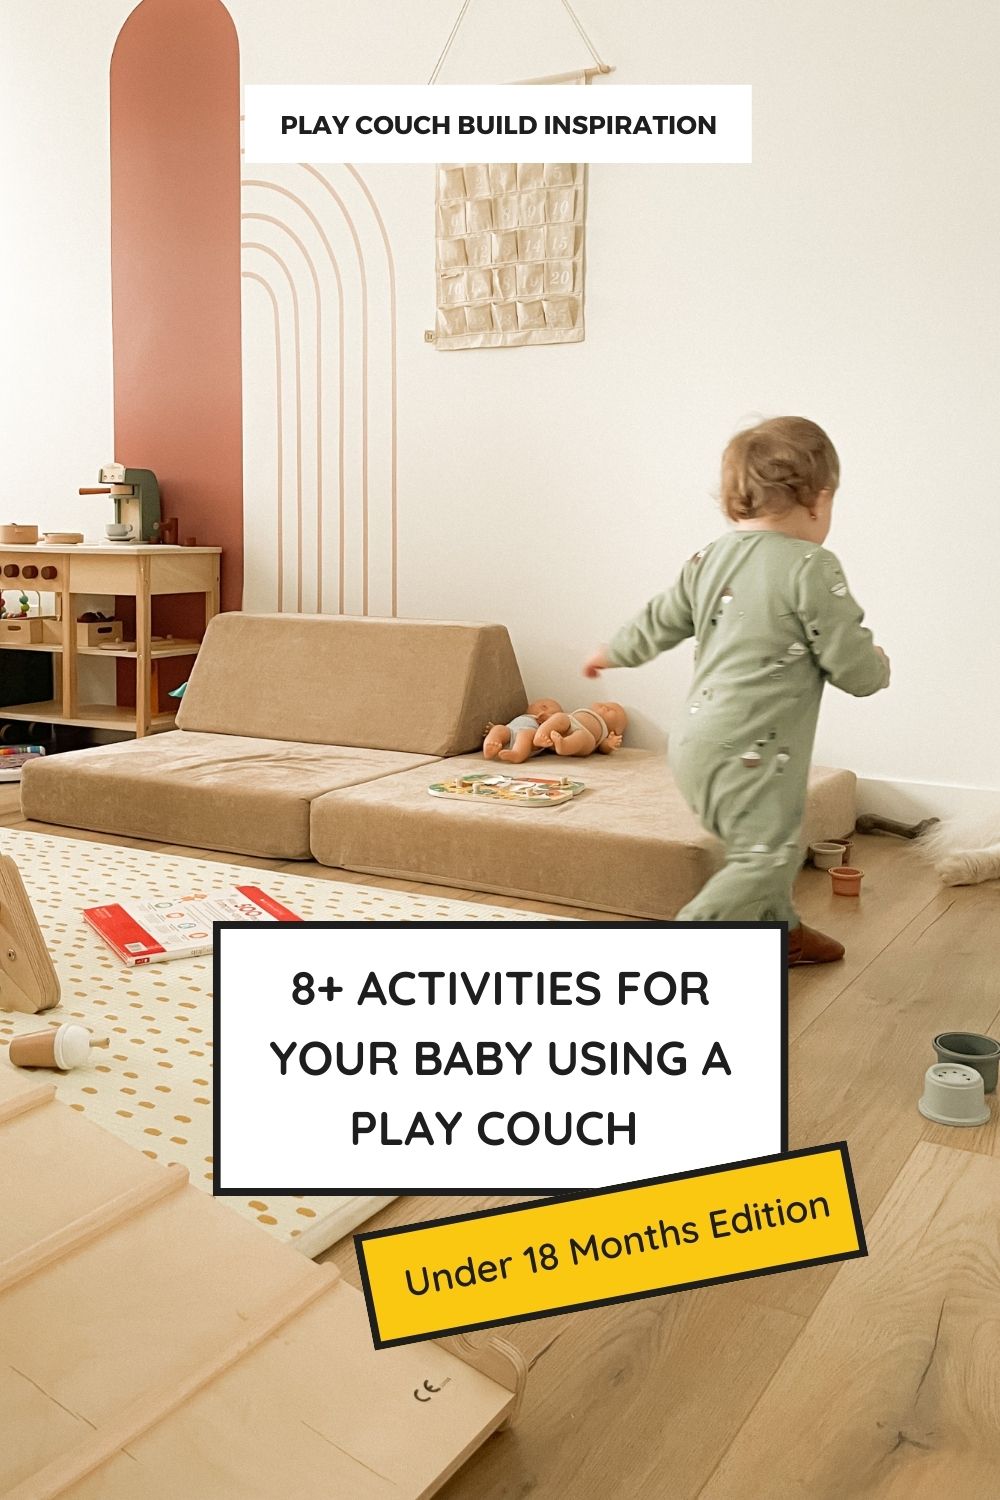 a toddler running on a neutral decor playroom with toys and a play couch in the middle